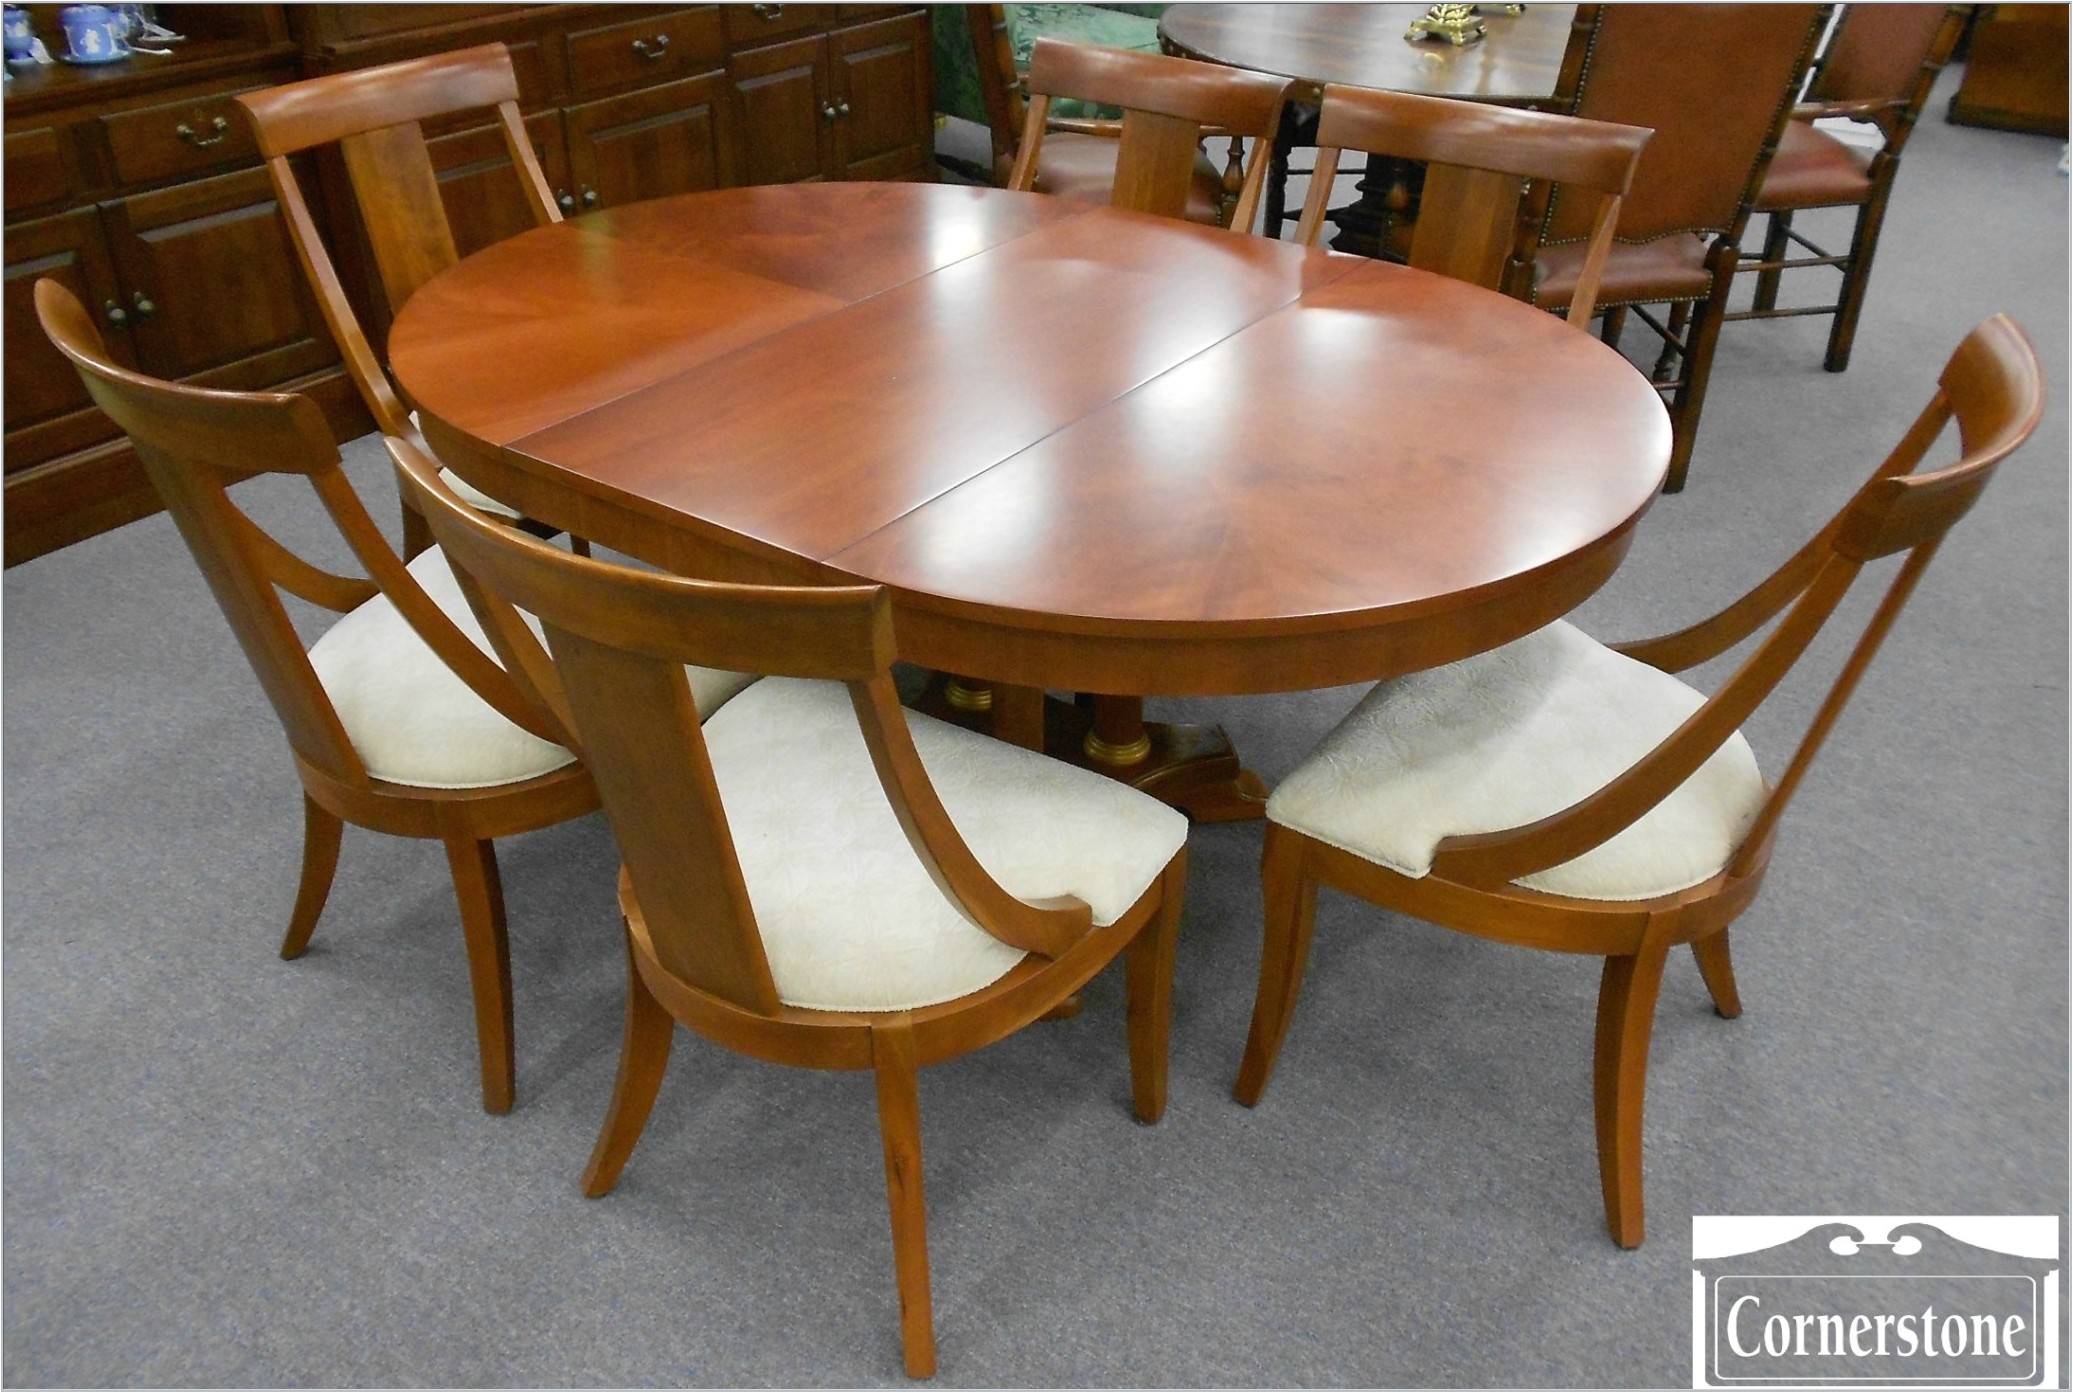 expandable oval brown wood ethan allen dining table with 6 dining chairs with white seat for